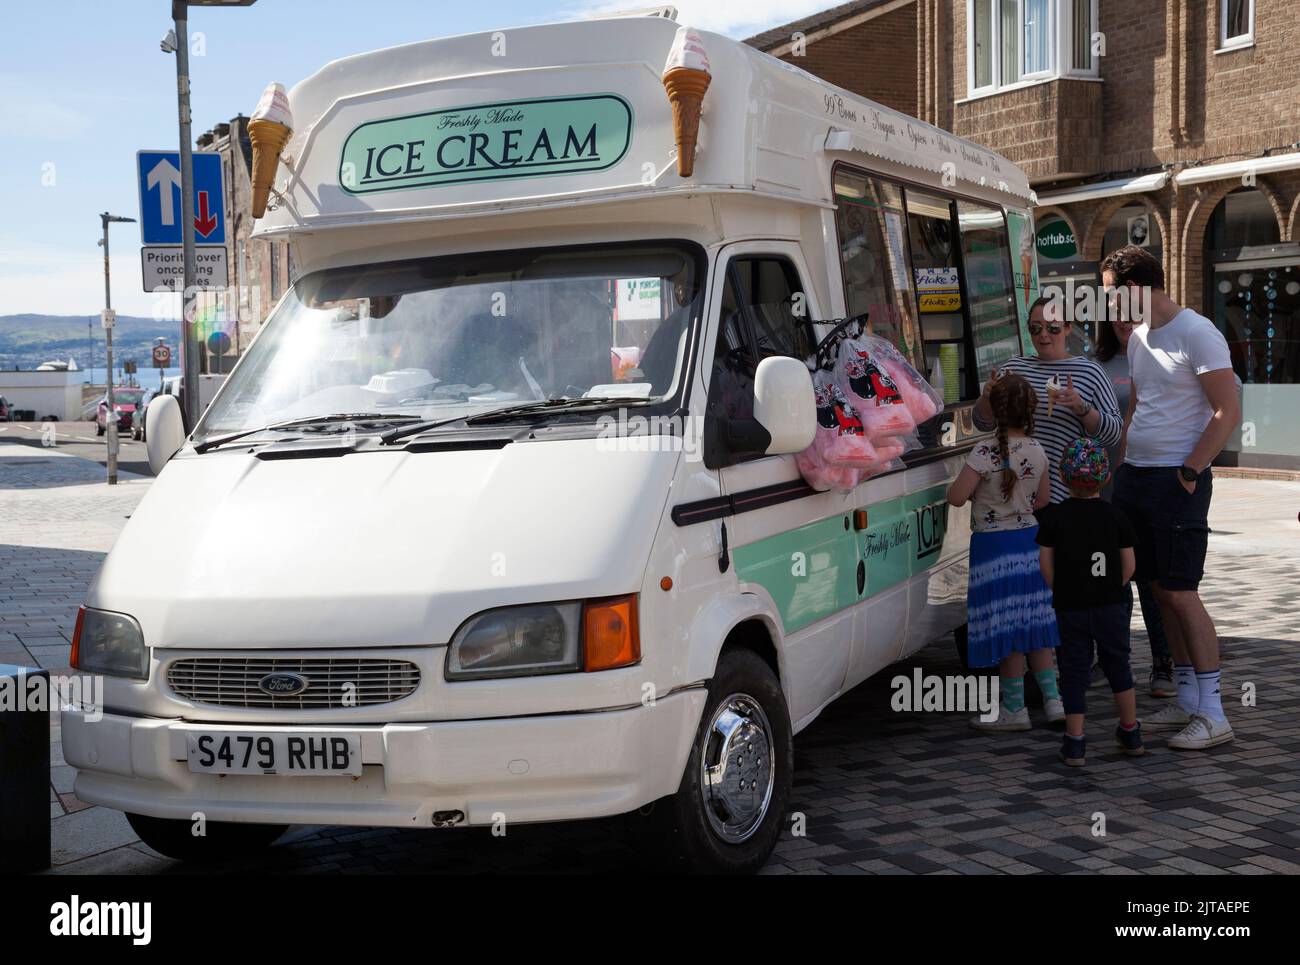 Ford van selling icecream in Colquhoun Square, Helensburgh, Scotland Stock Photo